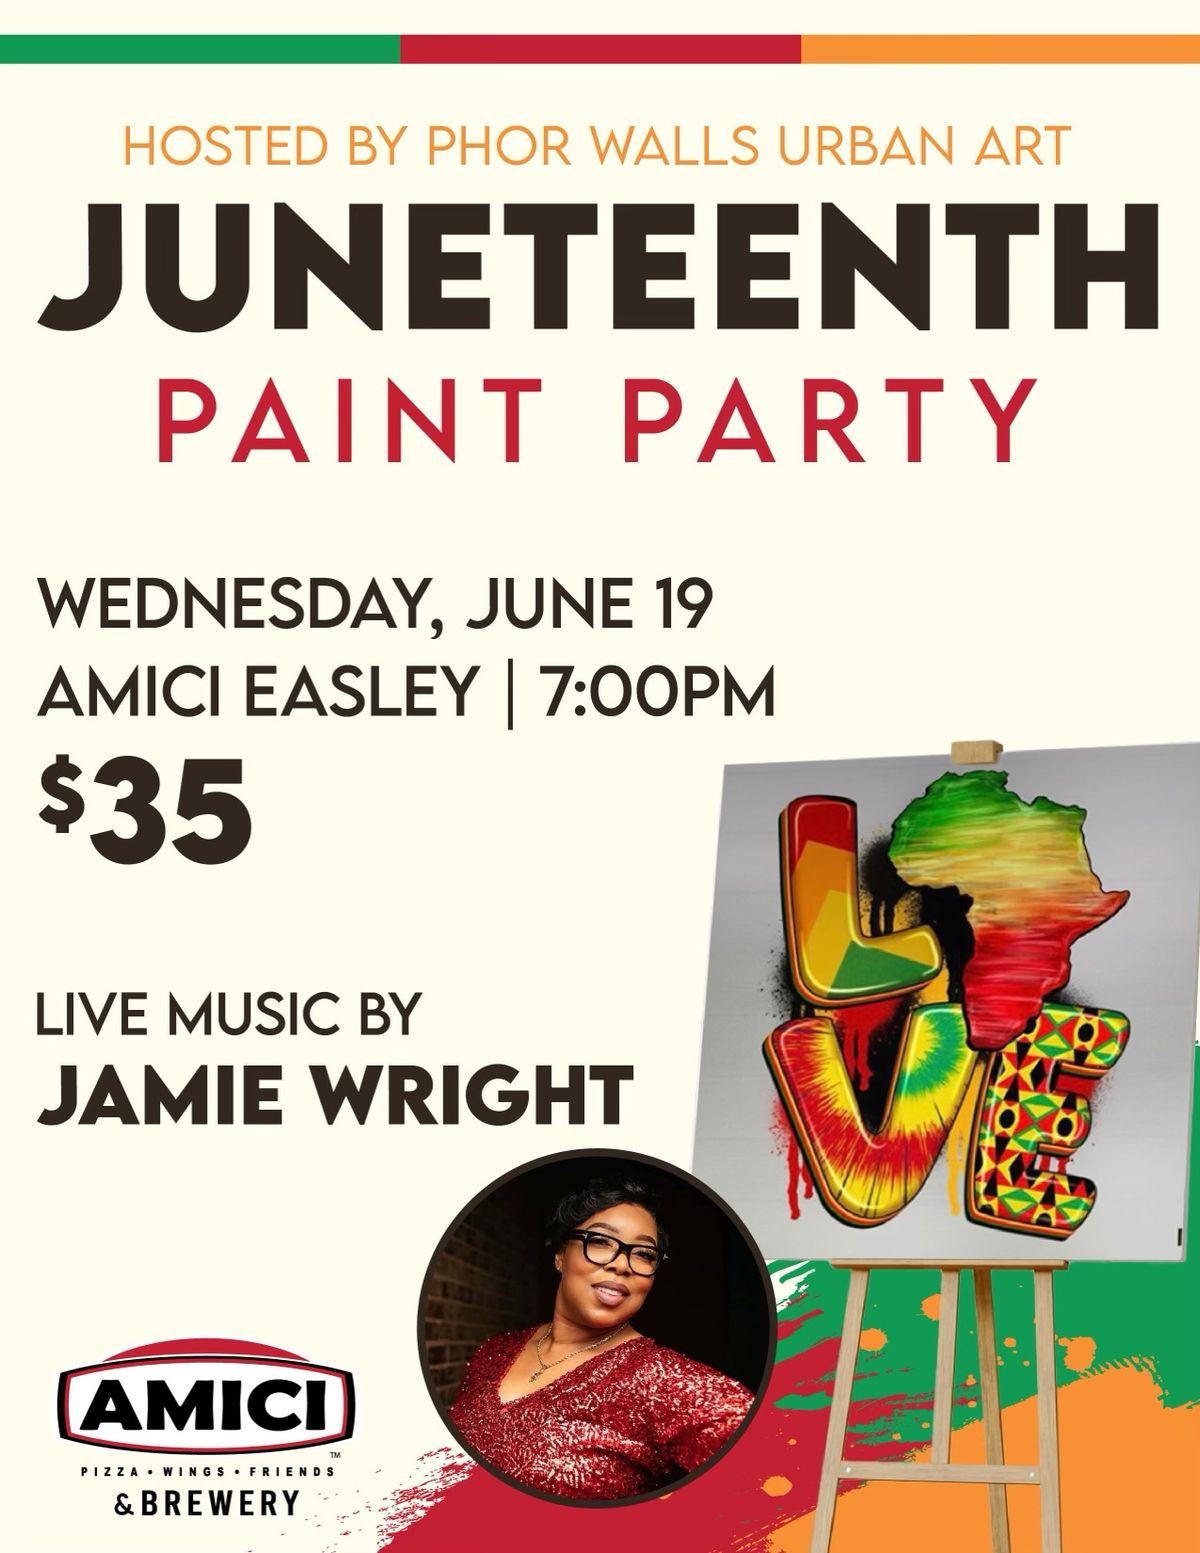 Juneteenth Paint Party at Amici Easley